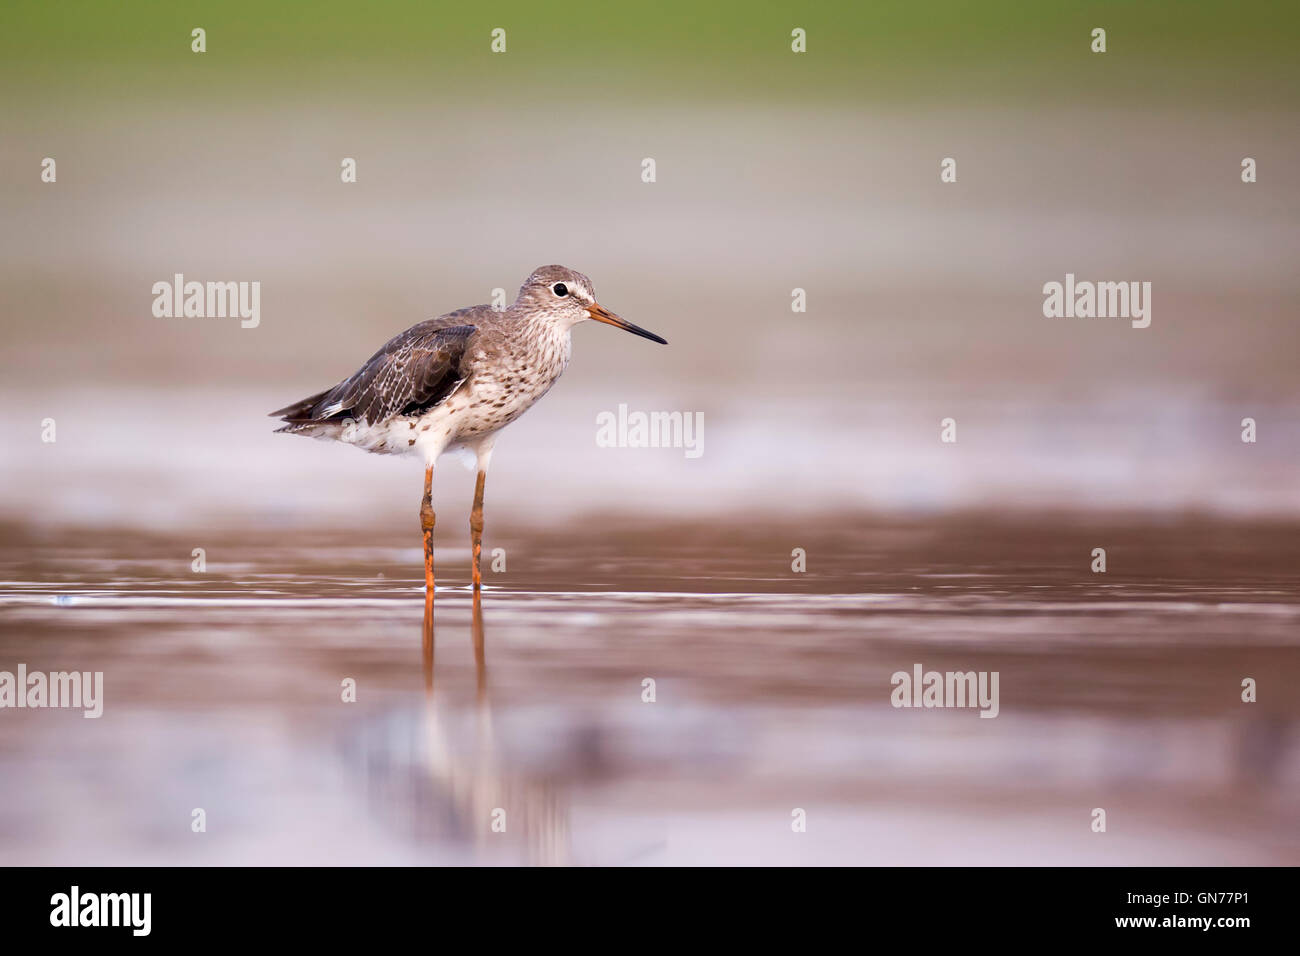 Common redshank (Tringa totanus) hunting for food in shallow water. This bird is found throughout Europe and northern Asia. It m Stock Photo